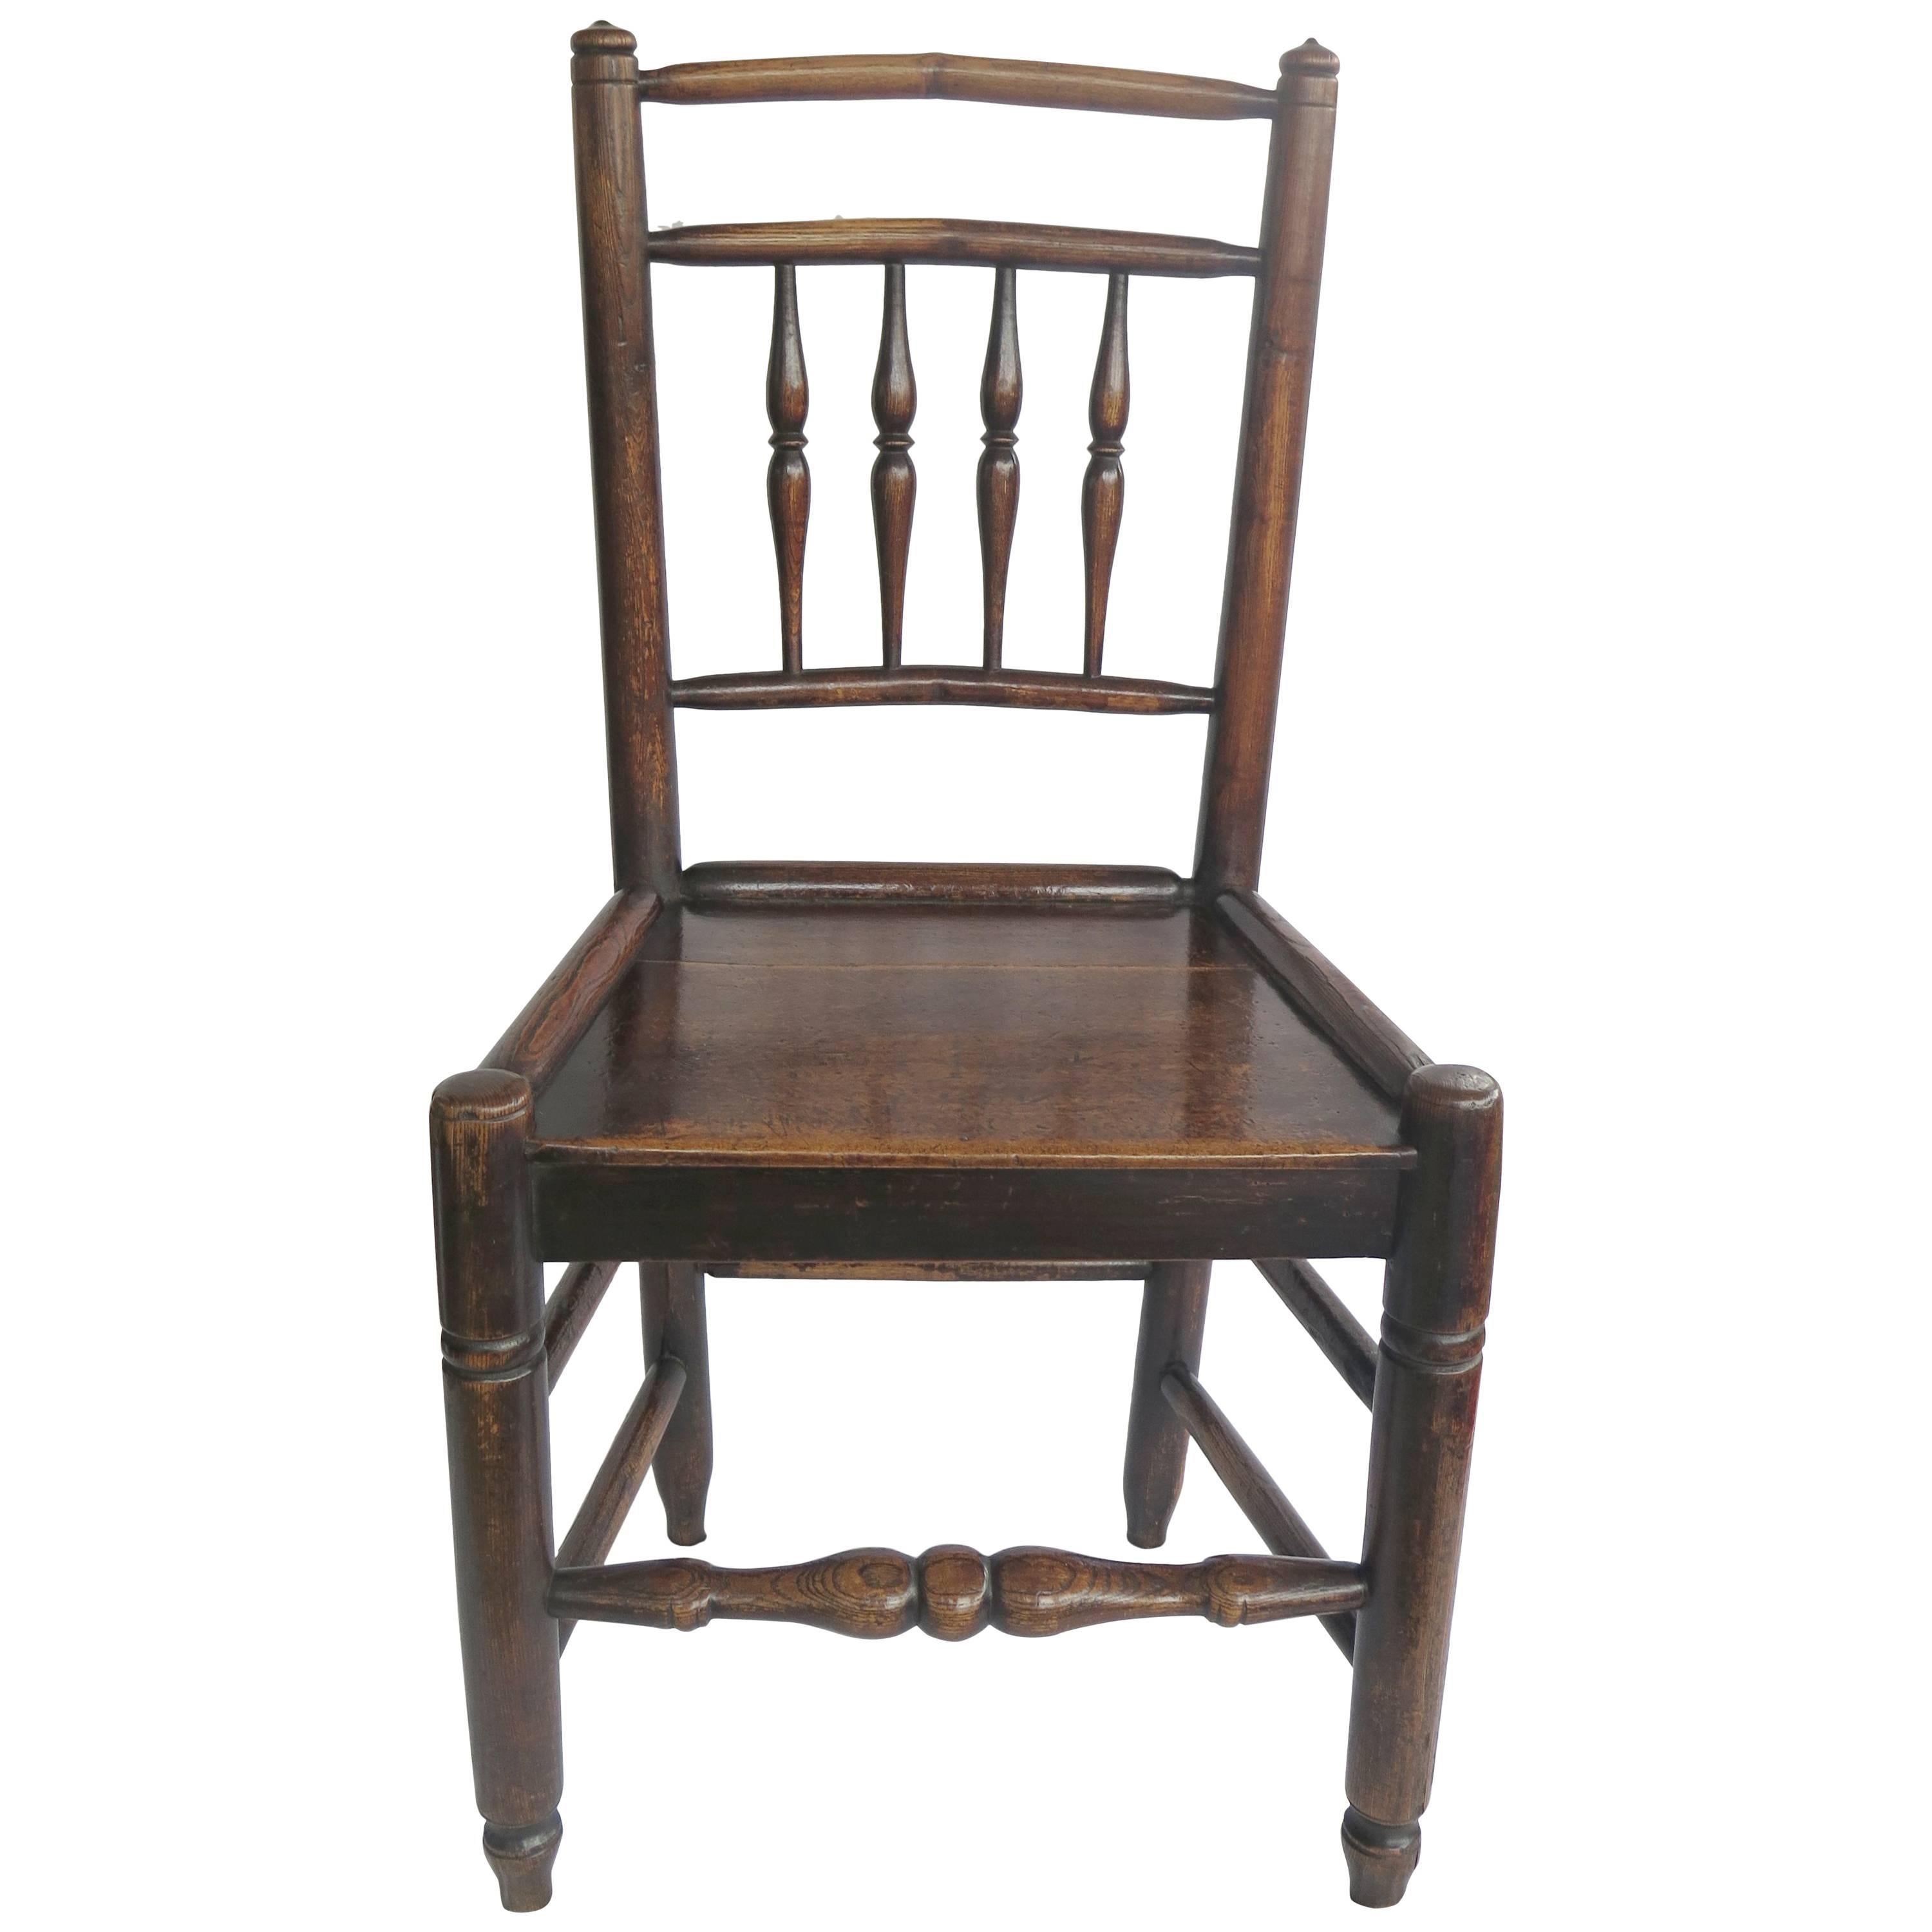 Hand-Crafted Georgian Side Chair Country Spindle Back Elm and Ash, English, circa 1800